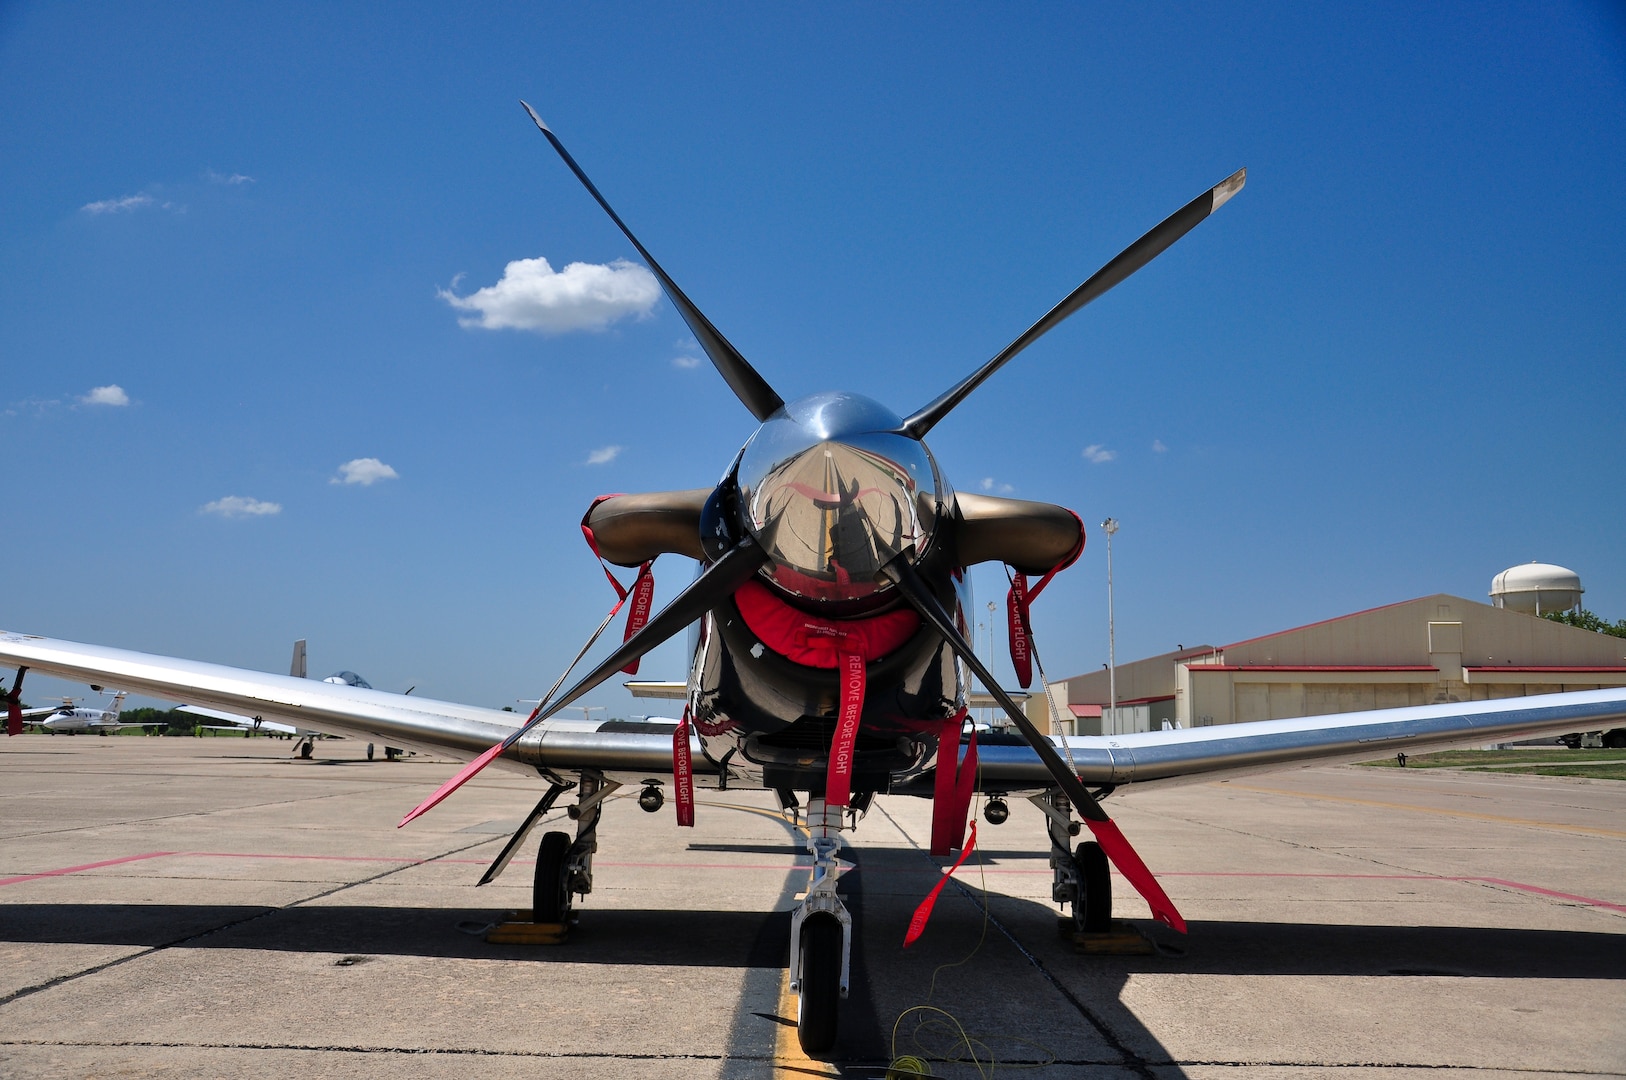 A T-6 Texan II from the 479th Flying Training Group at Naval Air Station Pensacola, Fla., sits on the south ramp at Joint Base San Antonio-Randolph, Texas, August 28, 2012. The 479th FTG is a geographically separated unit of the 12th Flying Training Wing and hosts Combat Systems Officer training for the U.S. Air Force. The 479th FTG flew 33 aircraft to Randolph in anticipation of Tropical Storm Isaac. (U.S. Air Force Photo by 2nd Lt. Keenan D. Kunst)